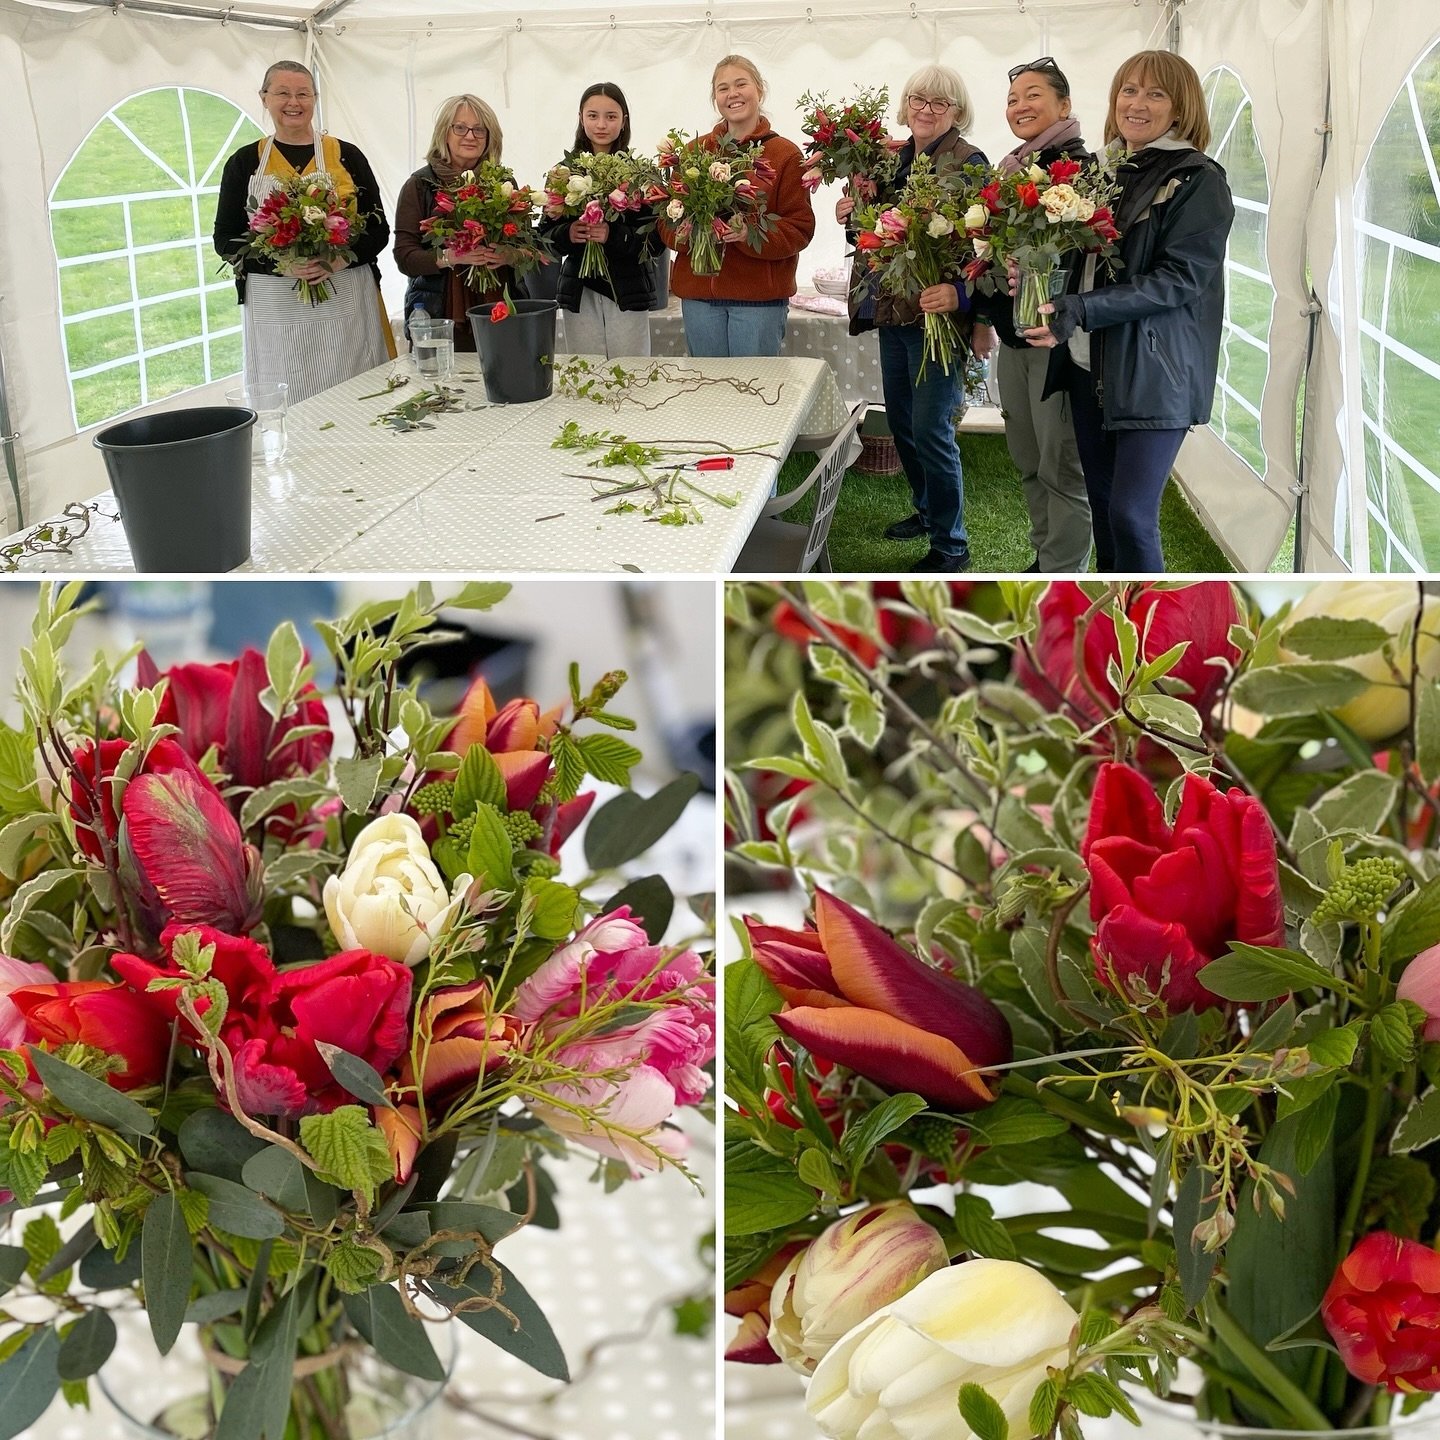 A huge thank you to @verycherrydesigns for an inspiring floristry workshop this morning at Chiltern Sky Flowers. British grown seasonal flowers came into their own. Freshly picked Tulips, Cornus, Hornbeam, Hazel, Pittosporum and Eucalyptus. 

The mar